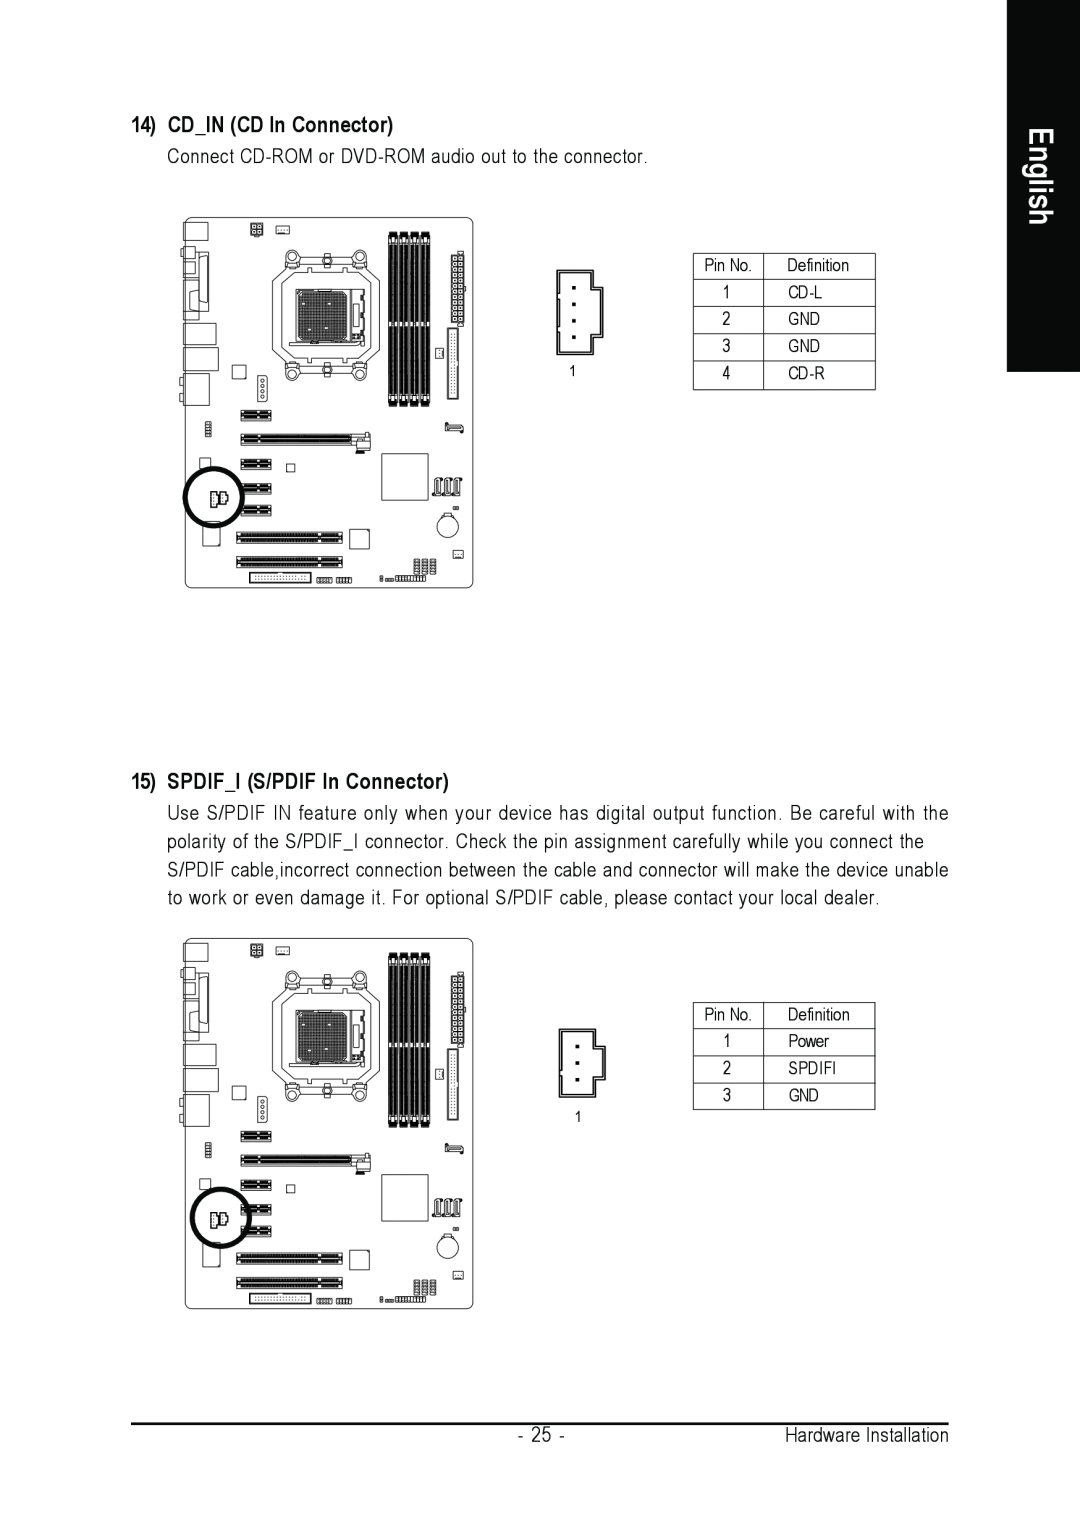 Gigabyte GA-M55S-S3 user manual CDIN CD In Connector, SPDIFI S/PDIF In Connector, English 